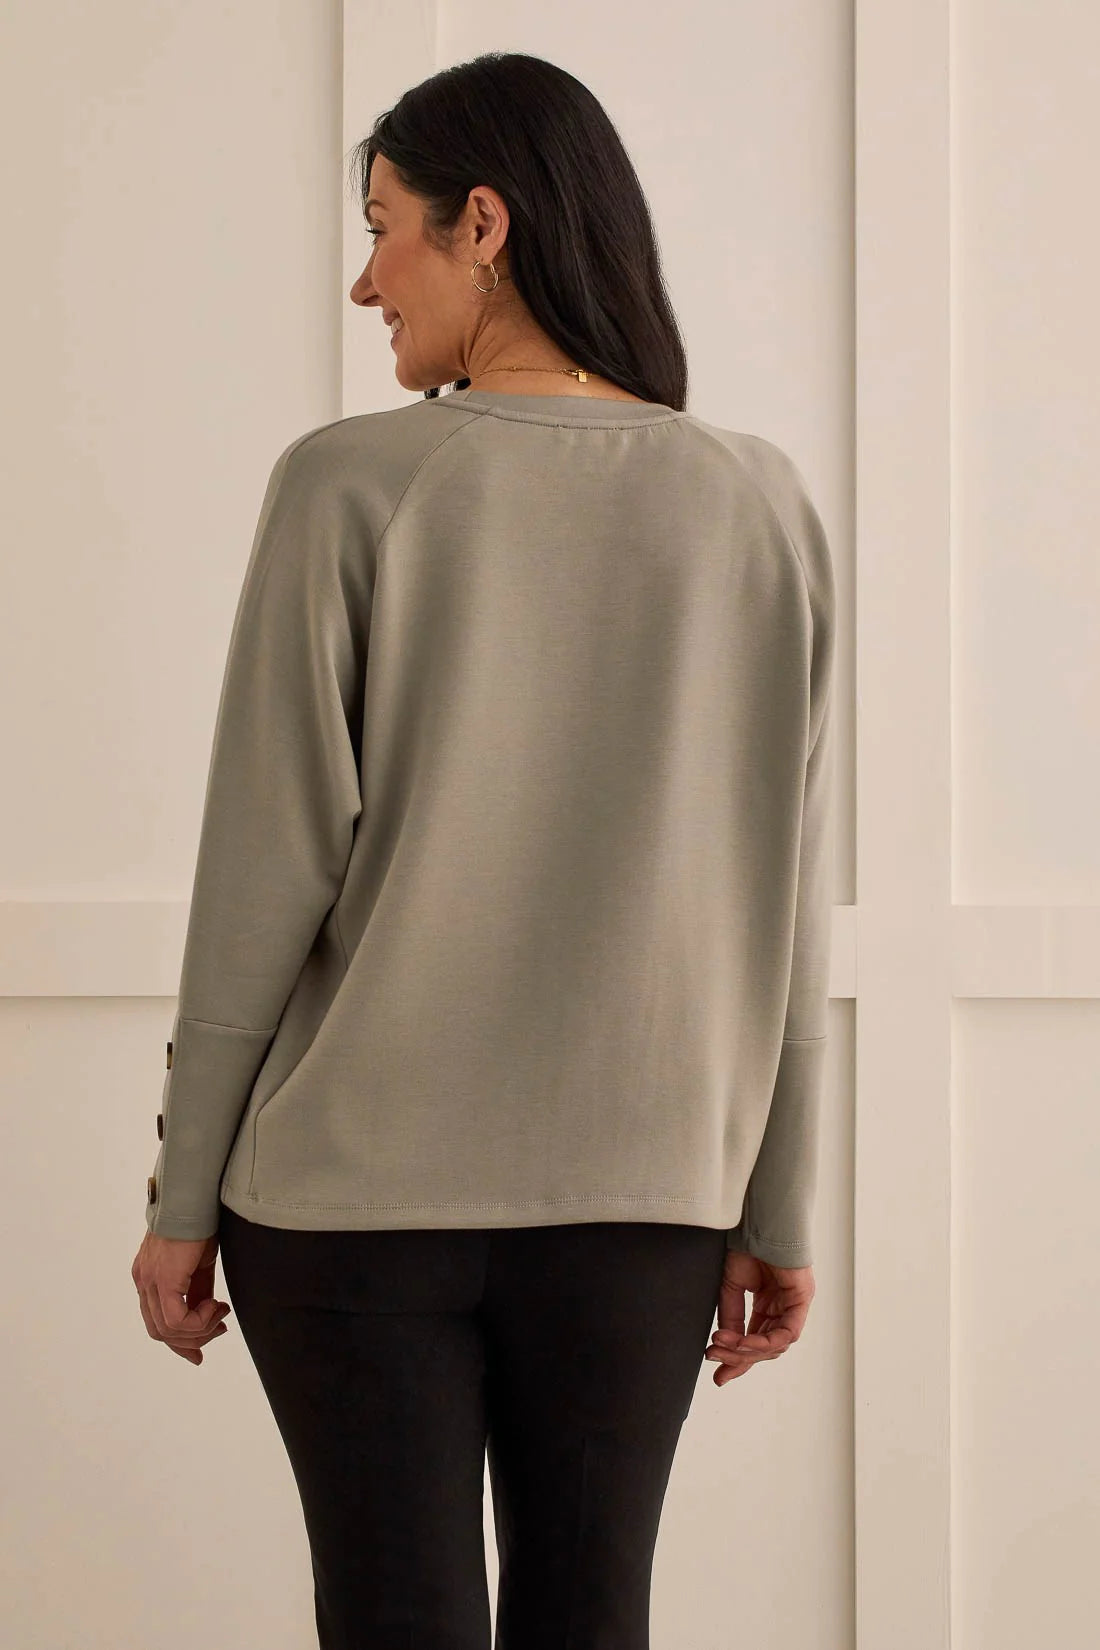 Everyday clothing just got a whole lot more fashionable. We love how this long-sleeve top matches everything in our wardrobe! 